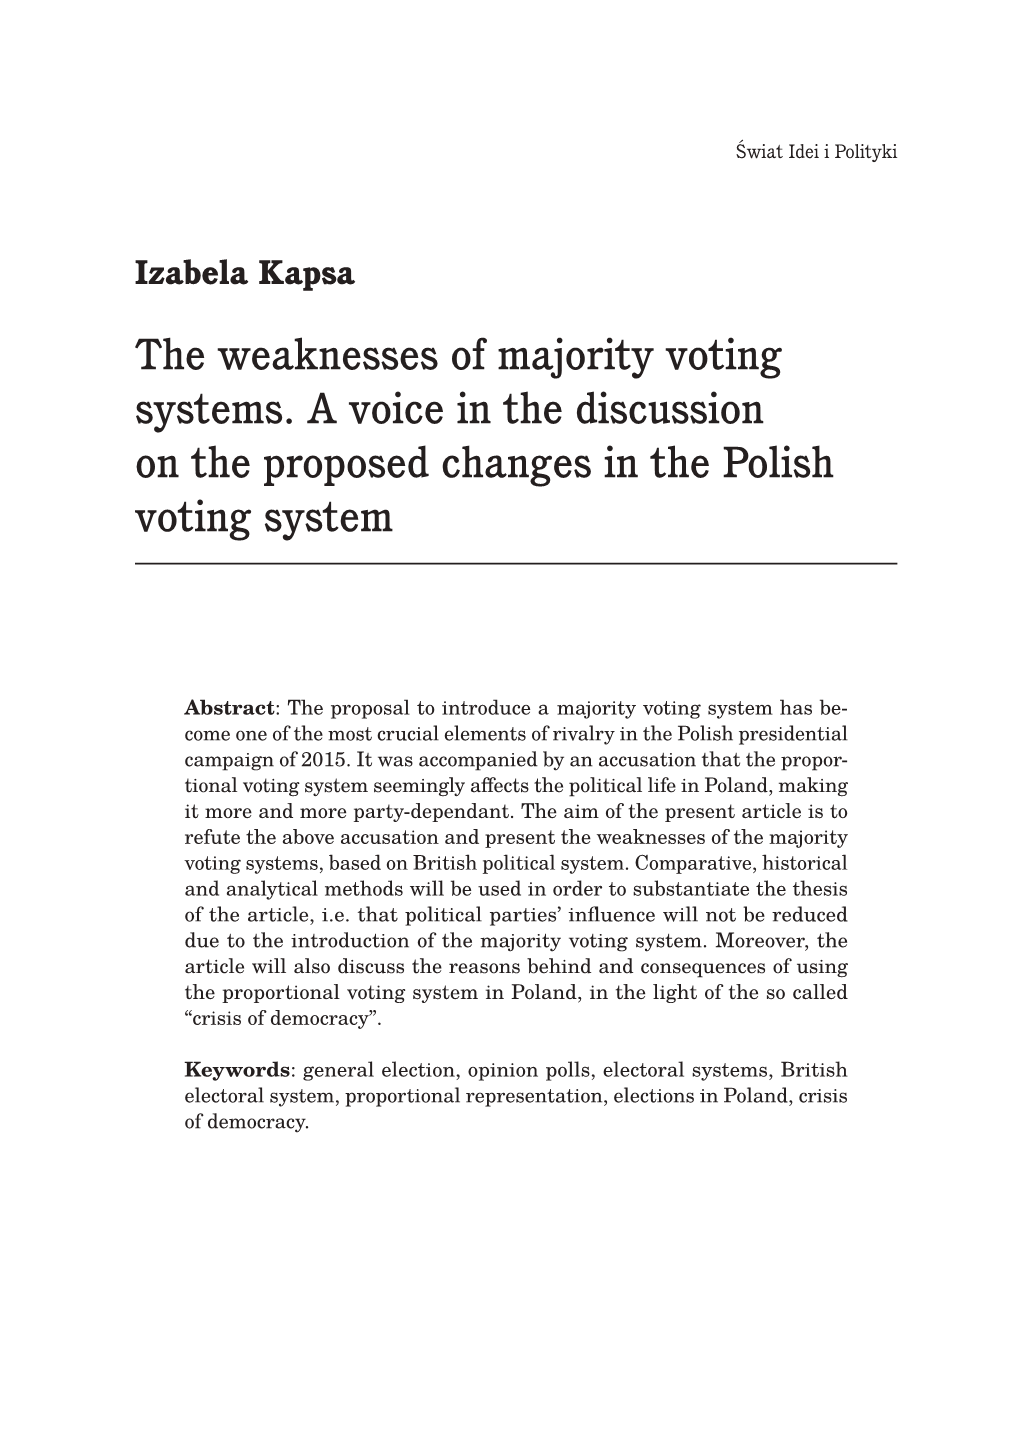 The Weaknesses of Majority Voting Systems. a Voice in the Discussion